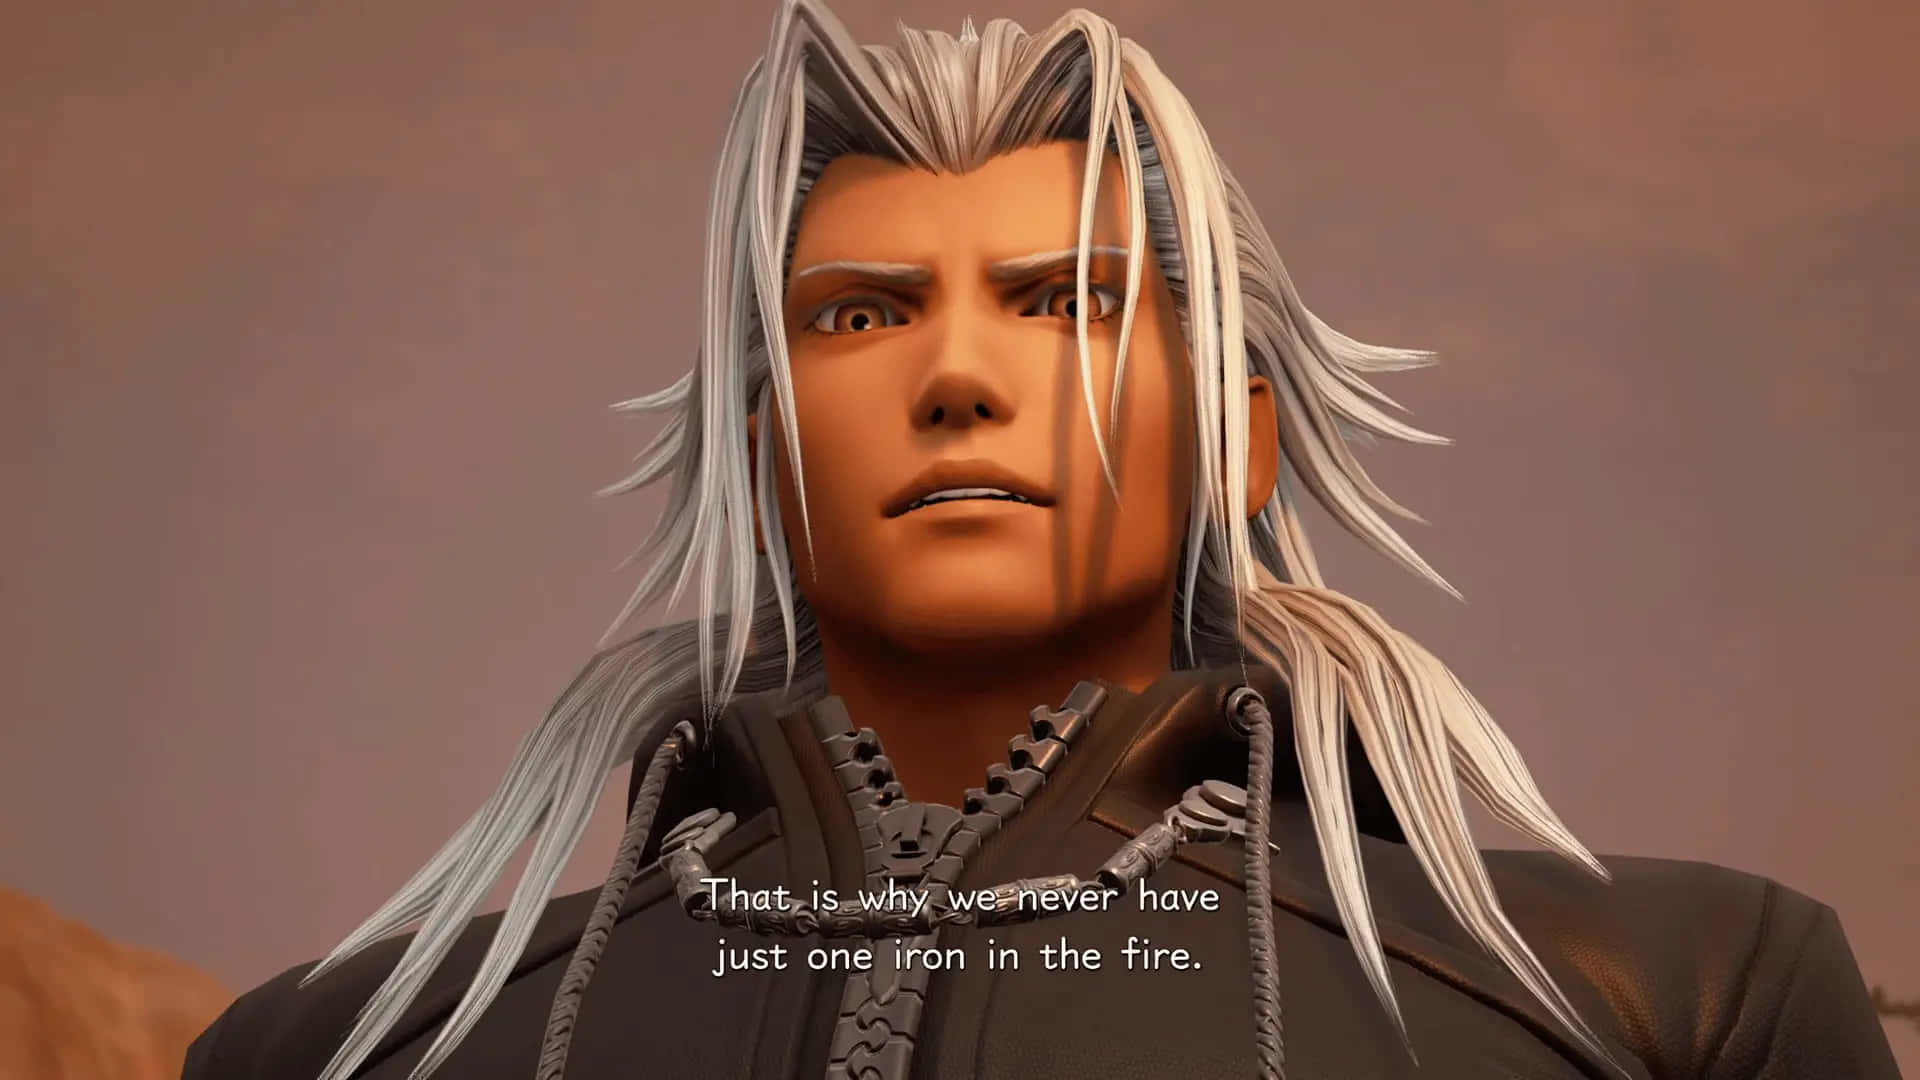 Xemnas, the Supreme Leader of Organization XIII, in the world of Kingdom Hearts Wallpaper